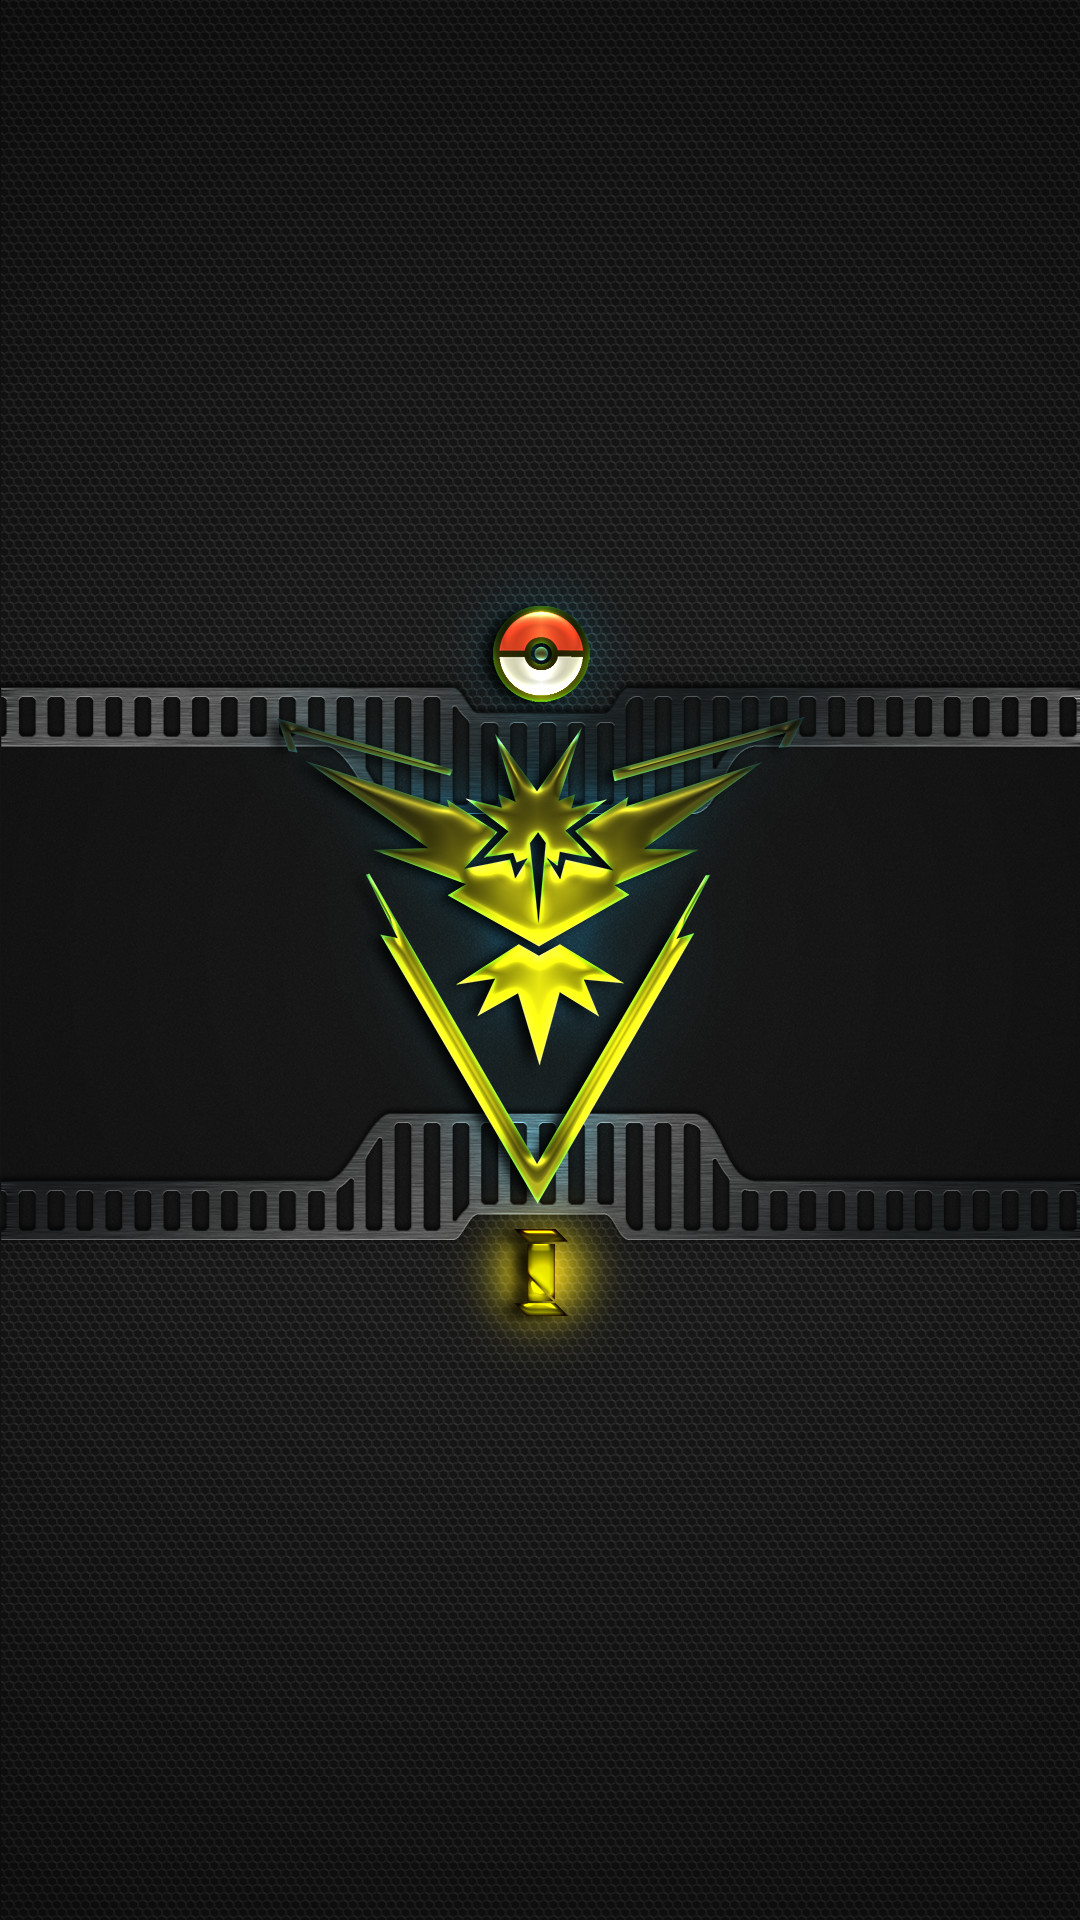 1080x1920 Team Instinct Wallpaper posted by Ethan Sellers